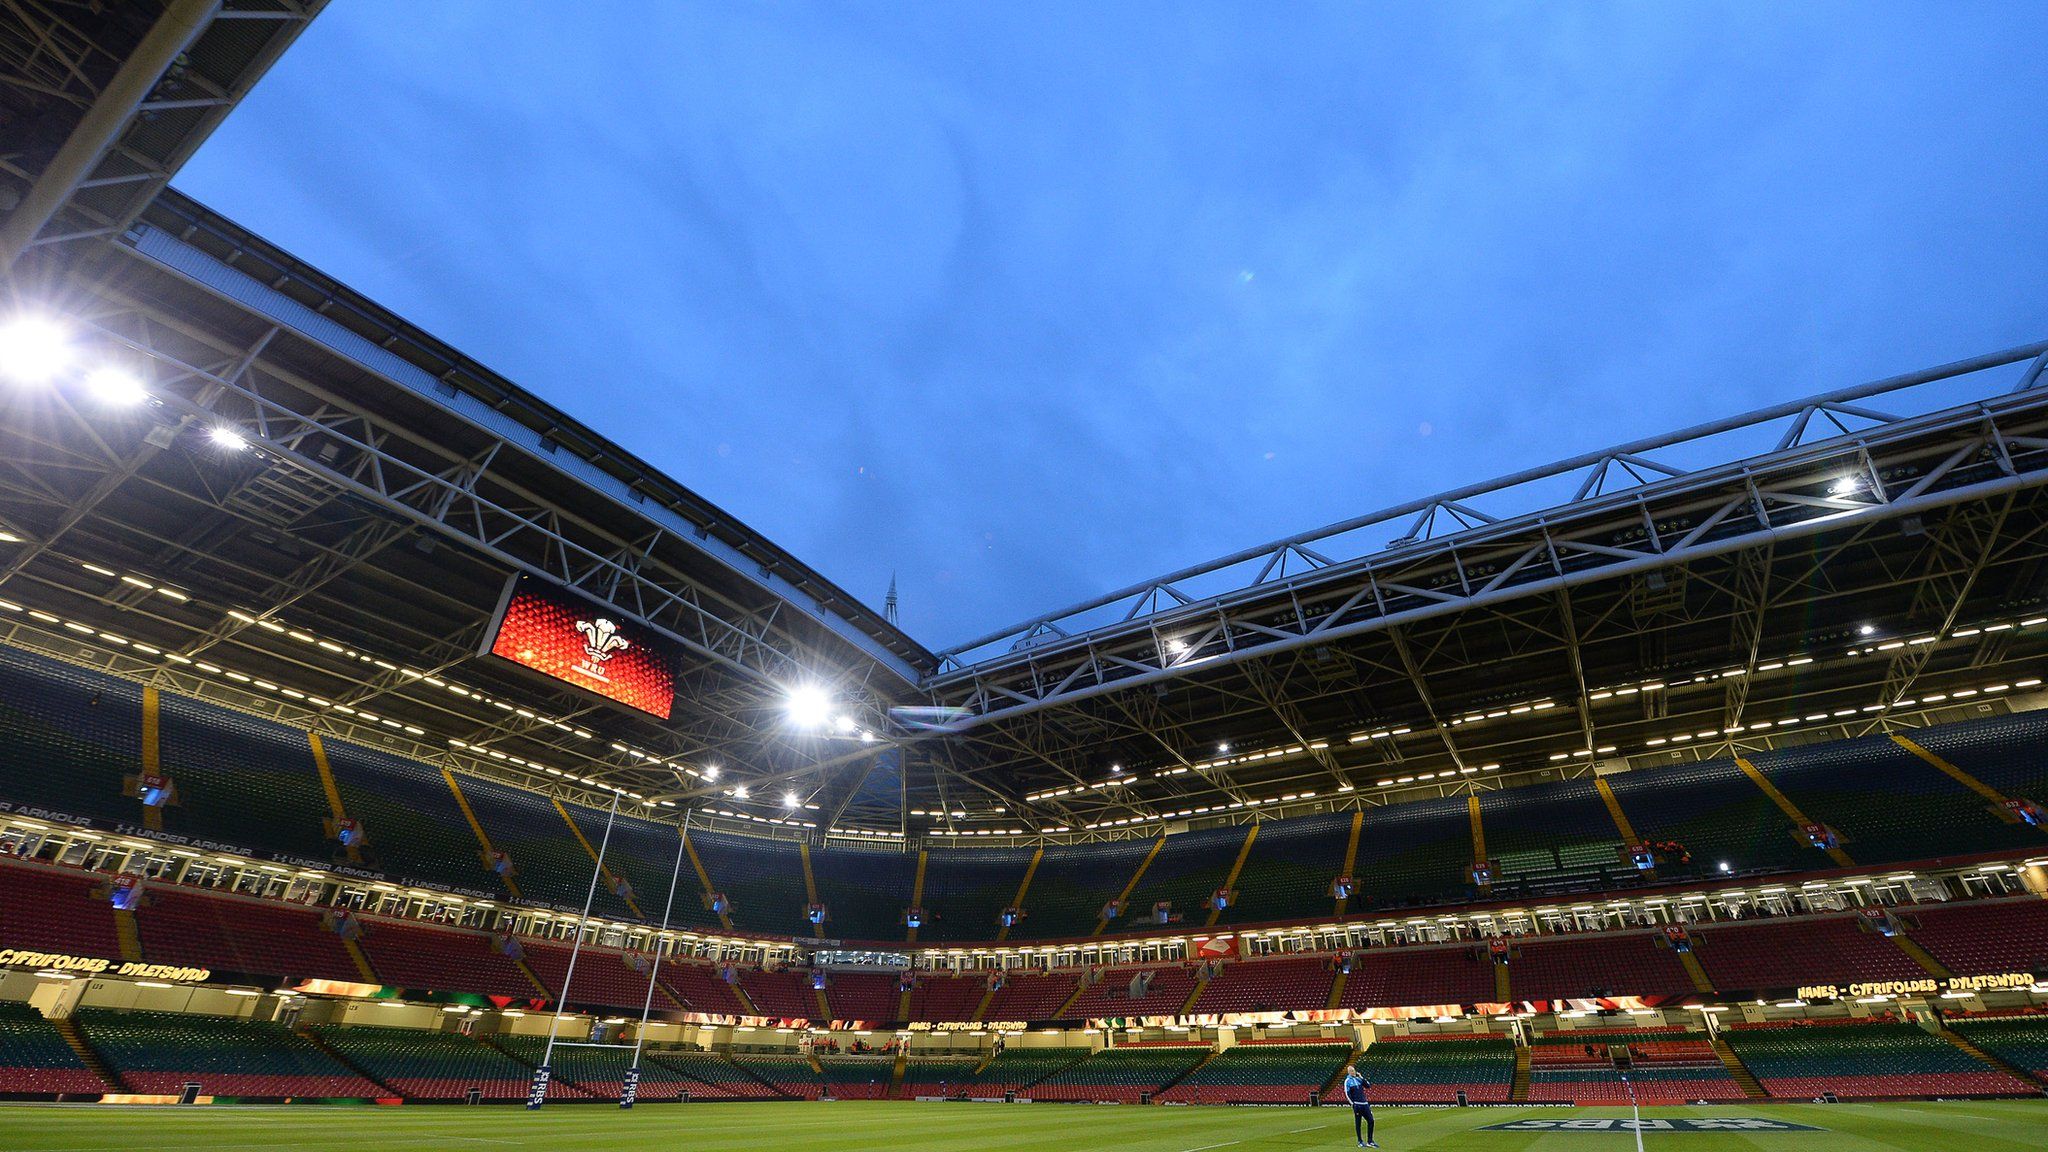 Principality Stadium with the roof open